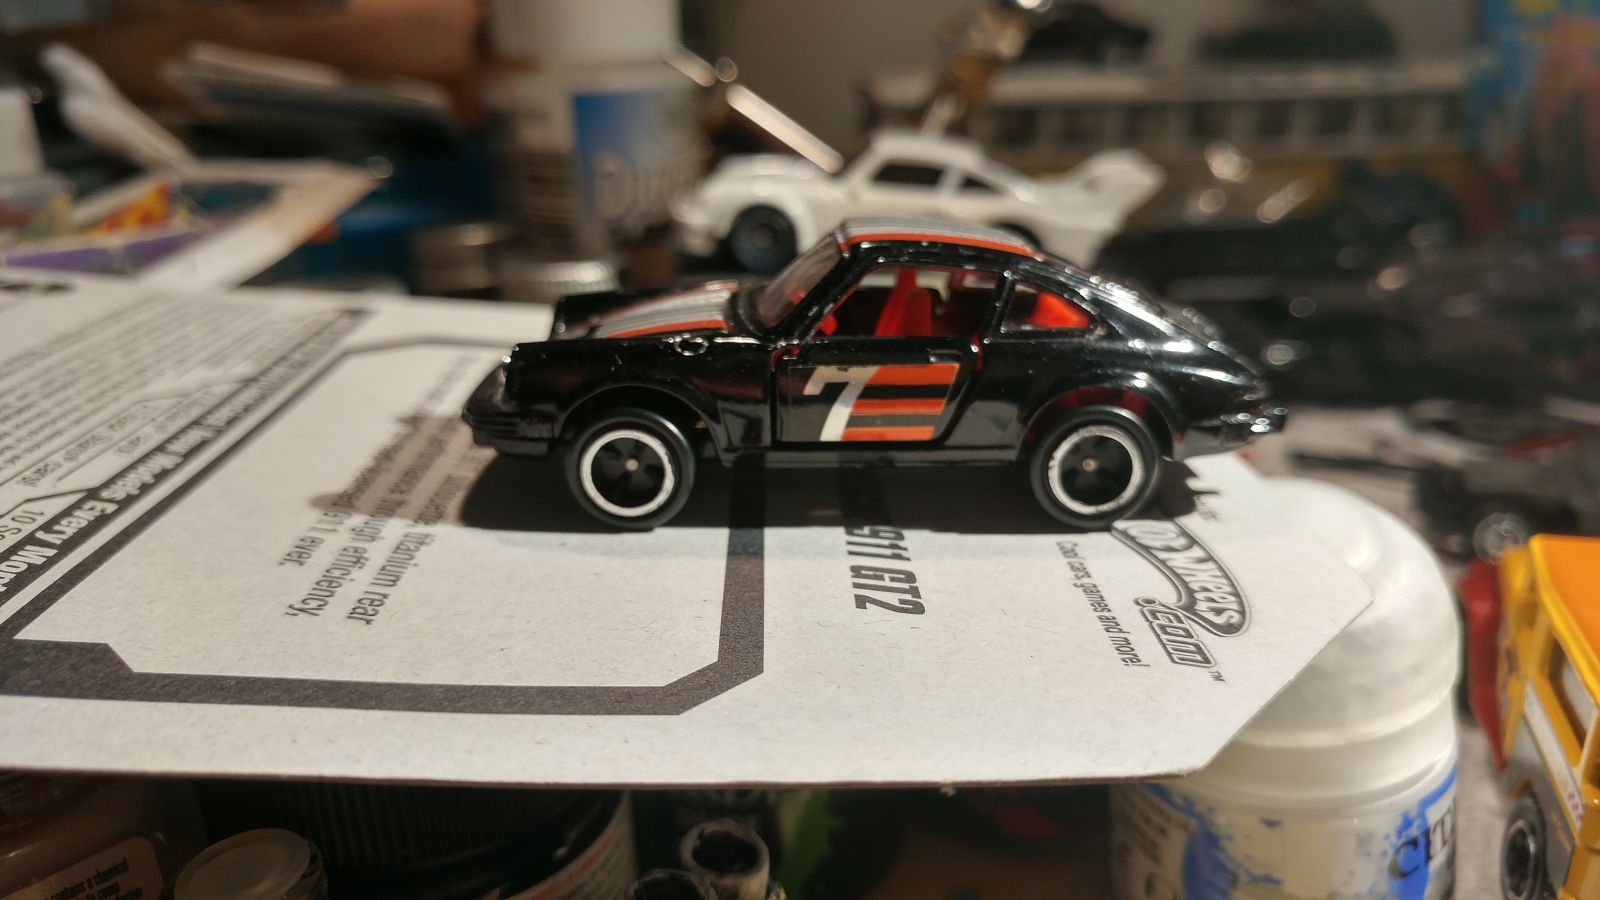 Tomica 911S. What a phenomenal casting! The doors open and everything. I may end up changing the stance/wheels at some point, but it’s a true gem.